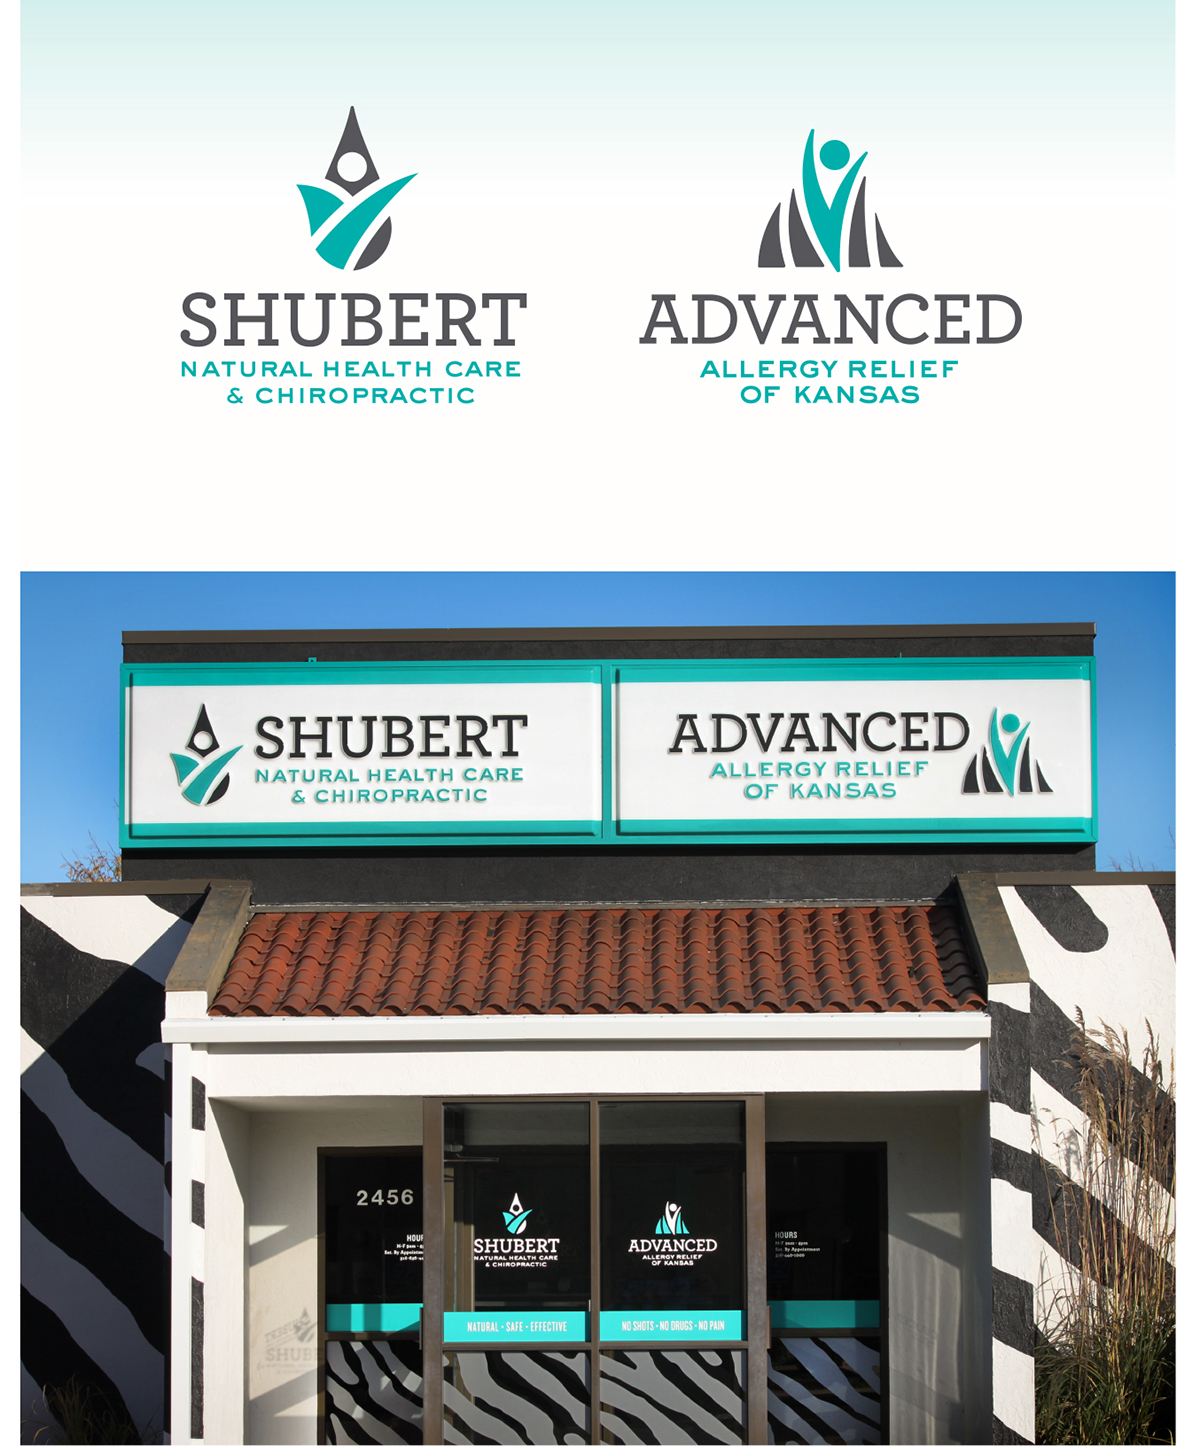 Signage identity logos logo signs chiropractor allergy relief natural healing vinyl building